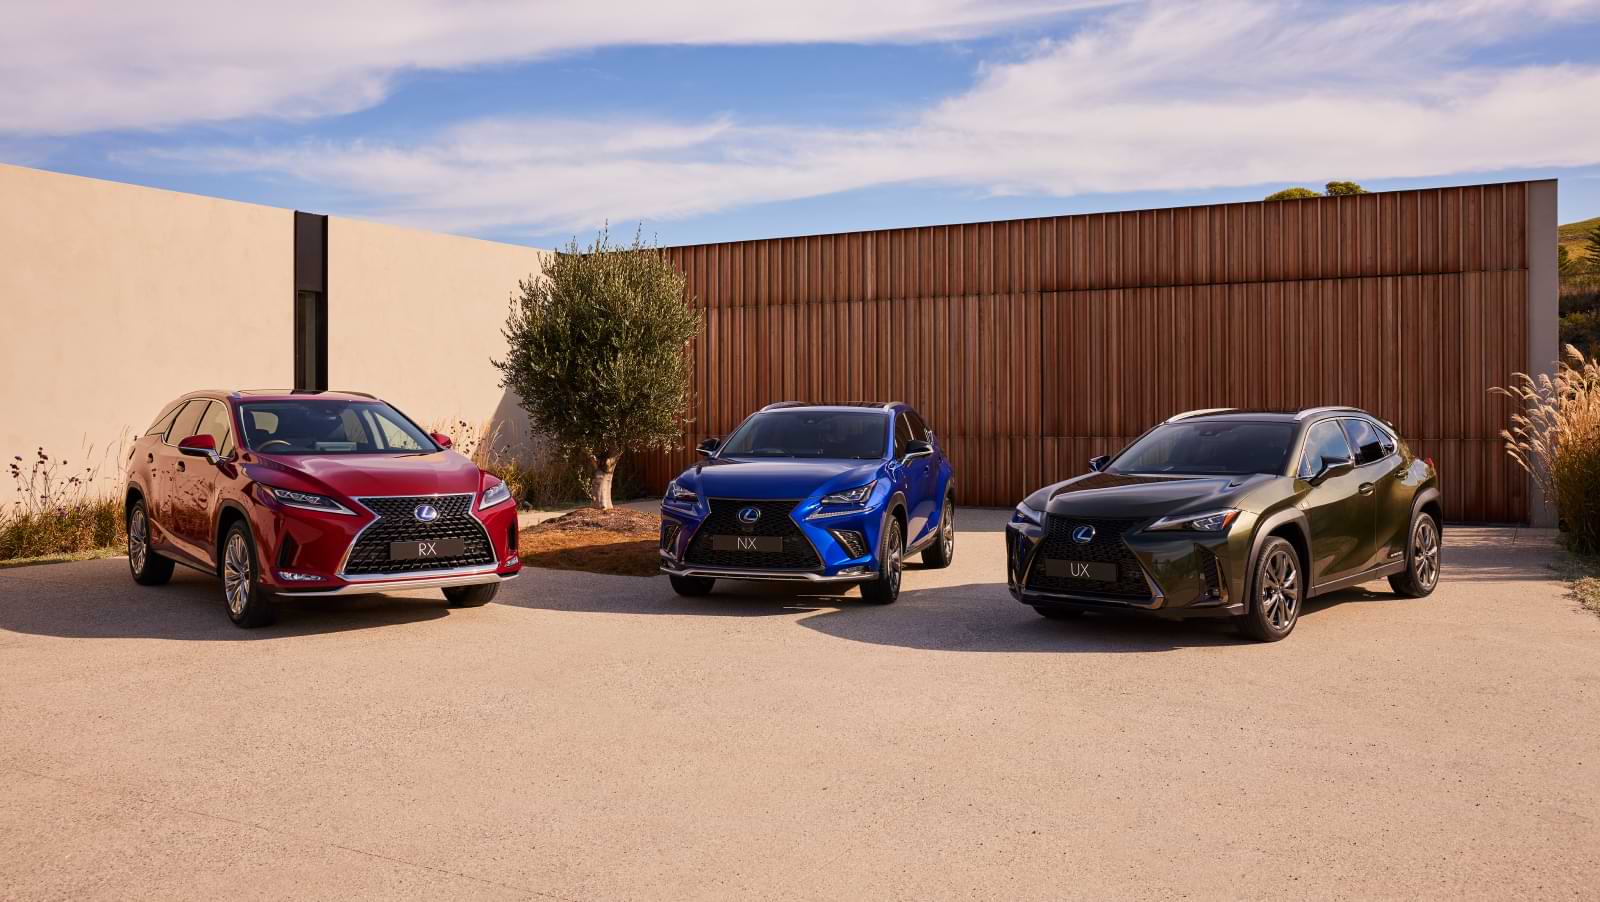 A red RX, blue NX and dark green UX lined up outside in a pebbled driveway.